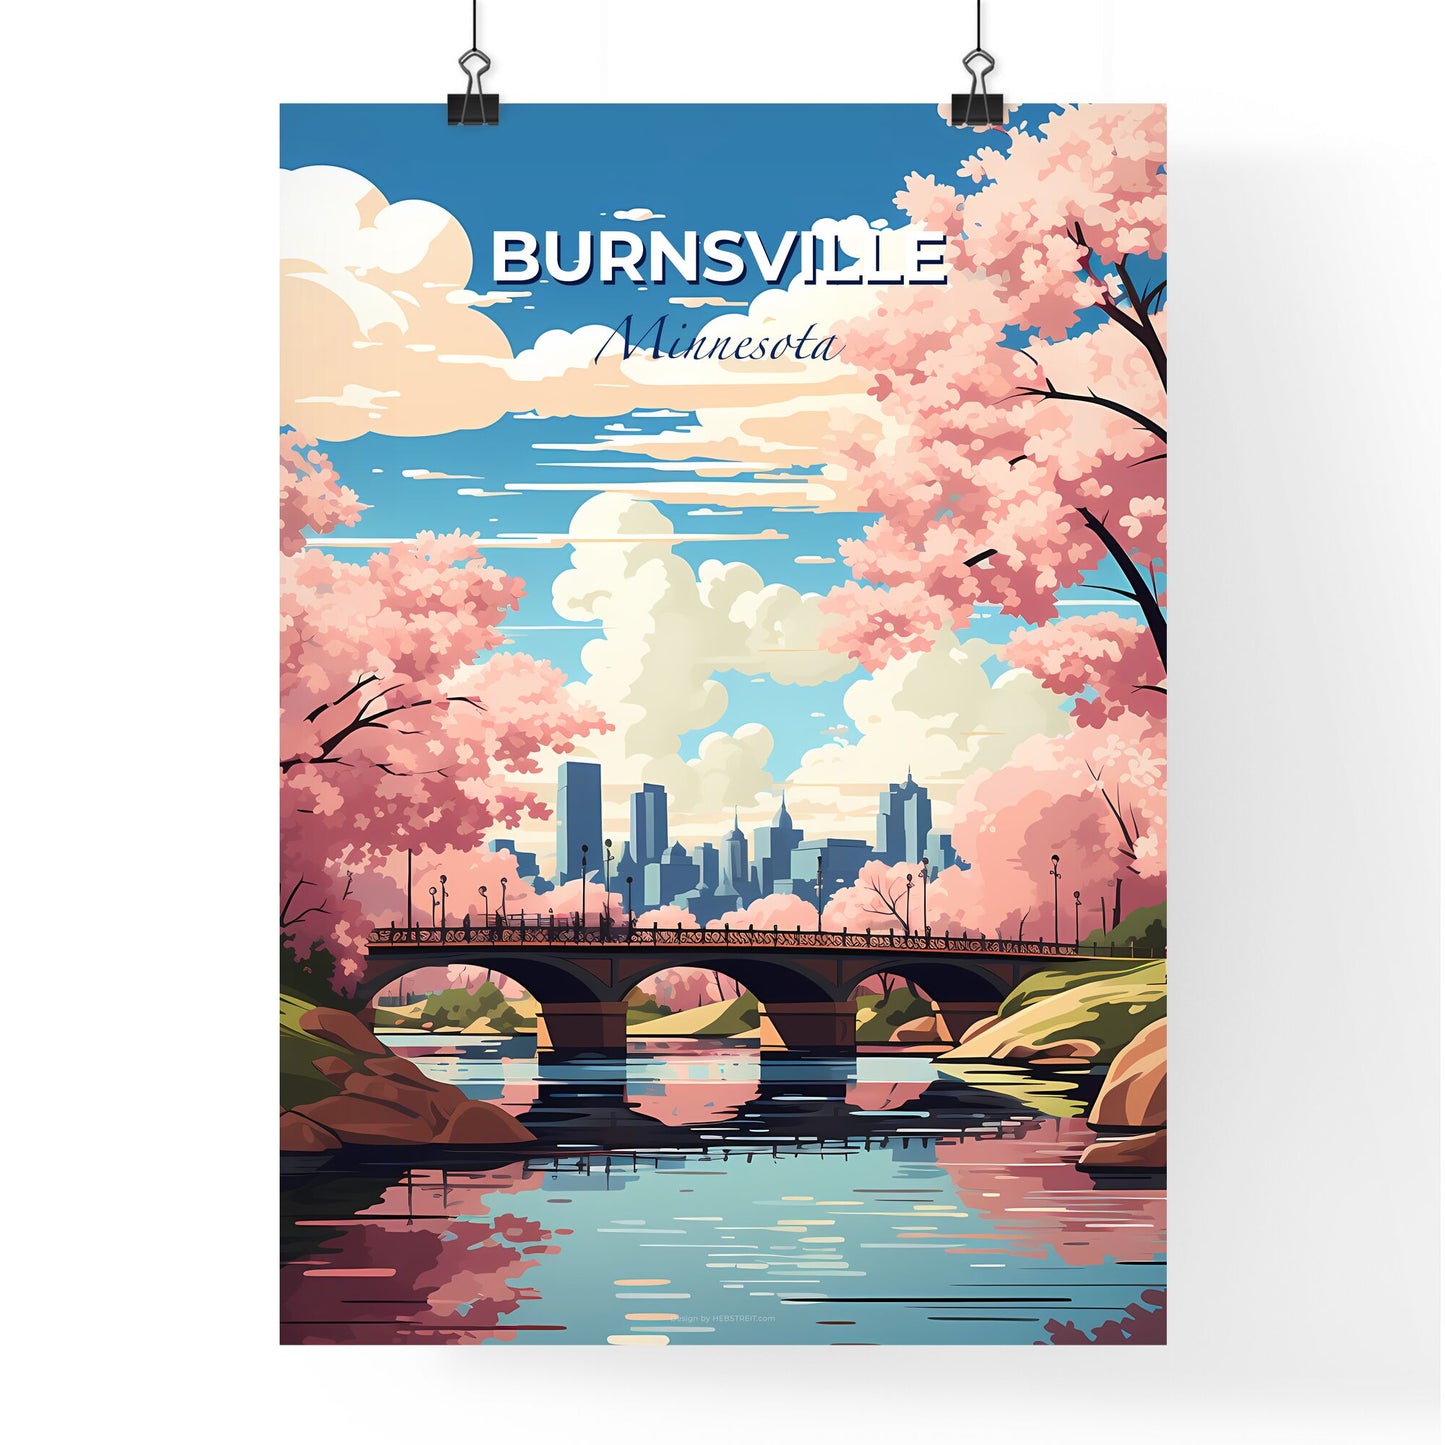 Burnsville, Minnesota, A Poster of a bridge over a river with pink trees and a city in the background Default Title